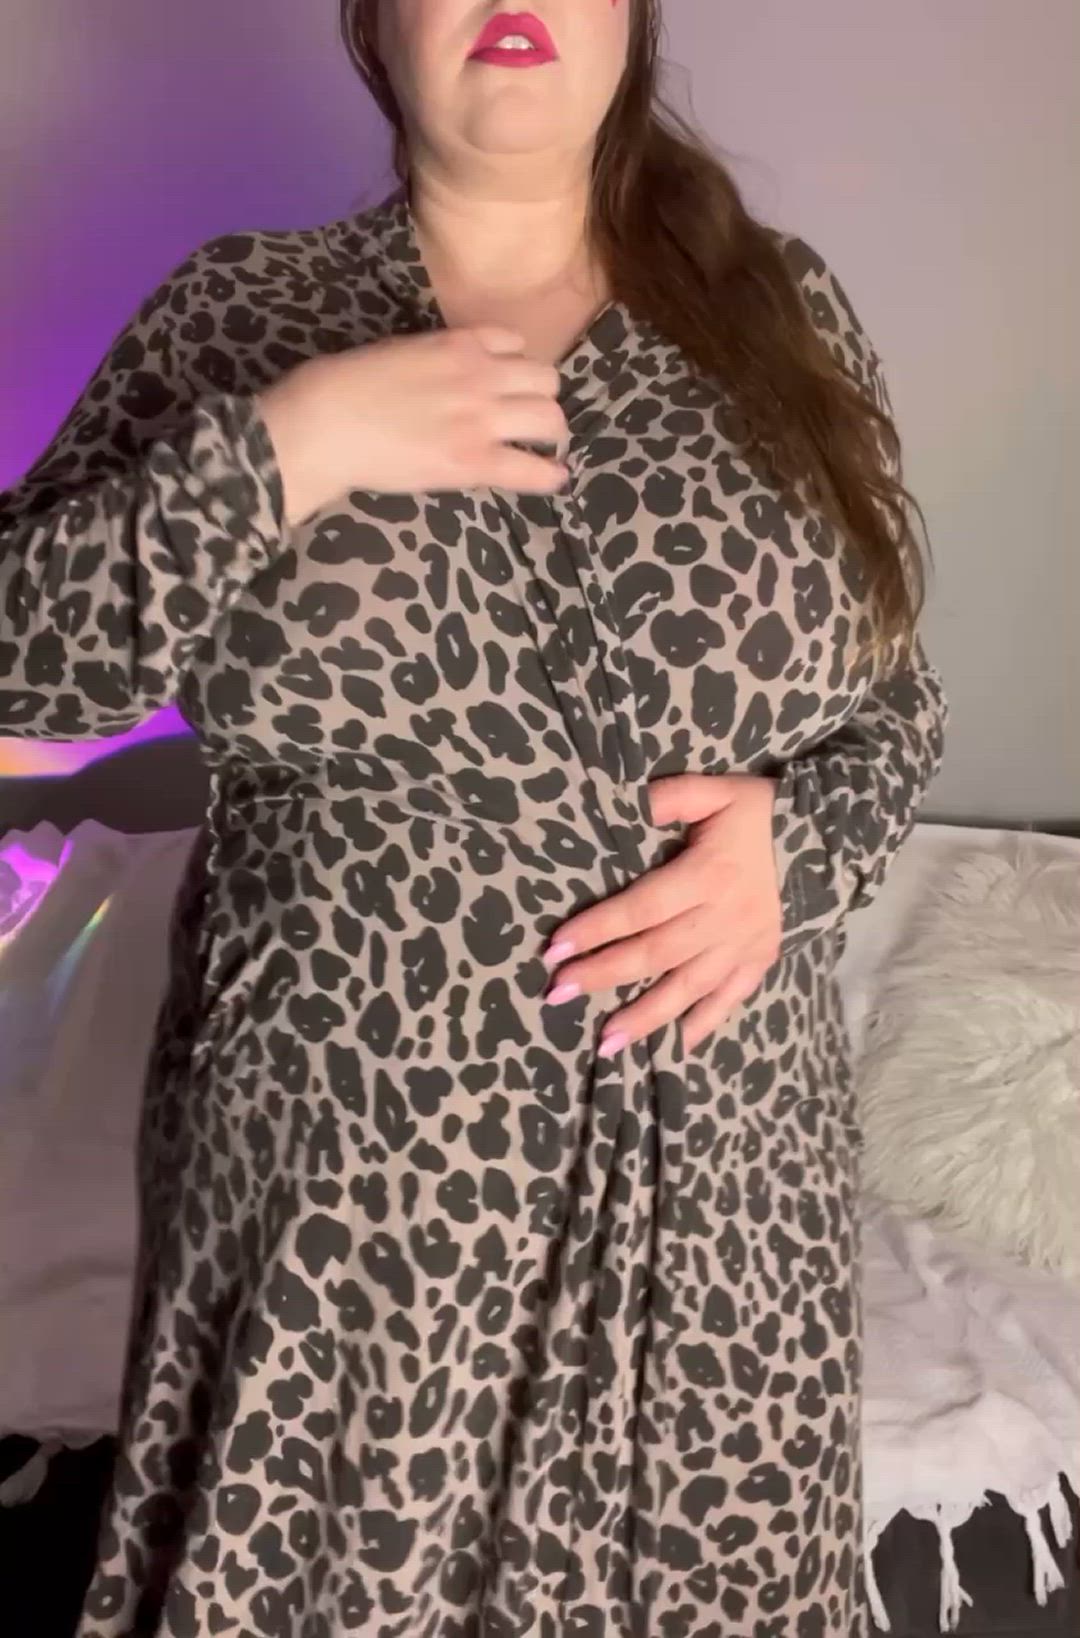 Big Tits porn video with onlyfans model cuddlyvampire <strong>@cuddly_vampire_vip</strong>